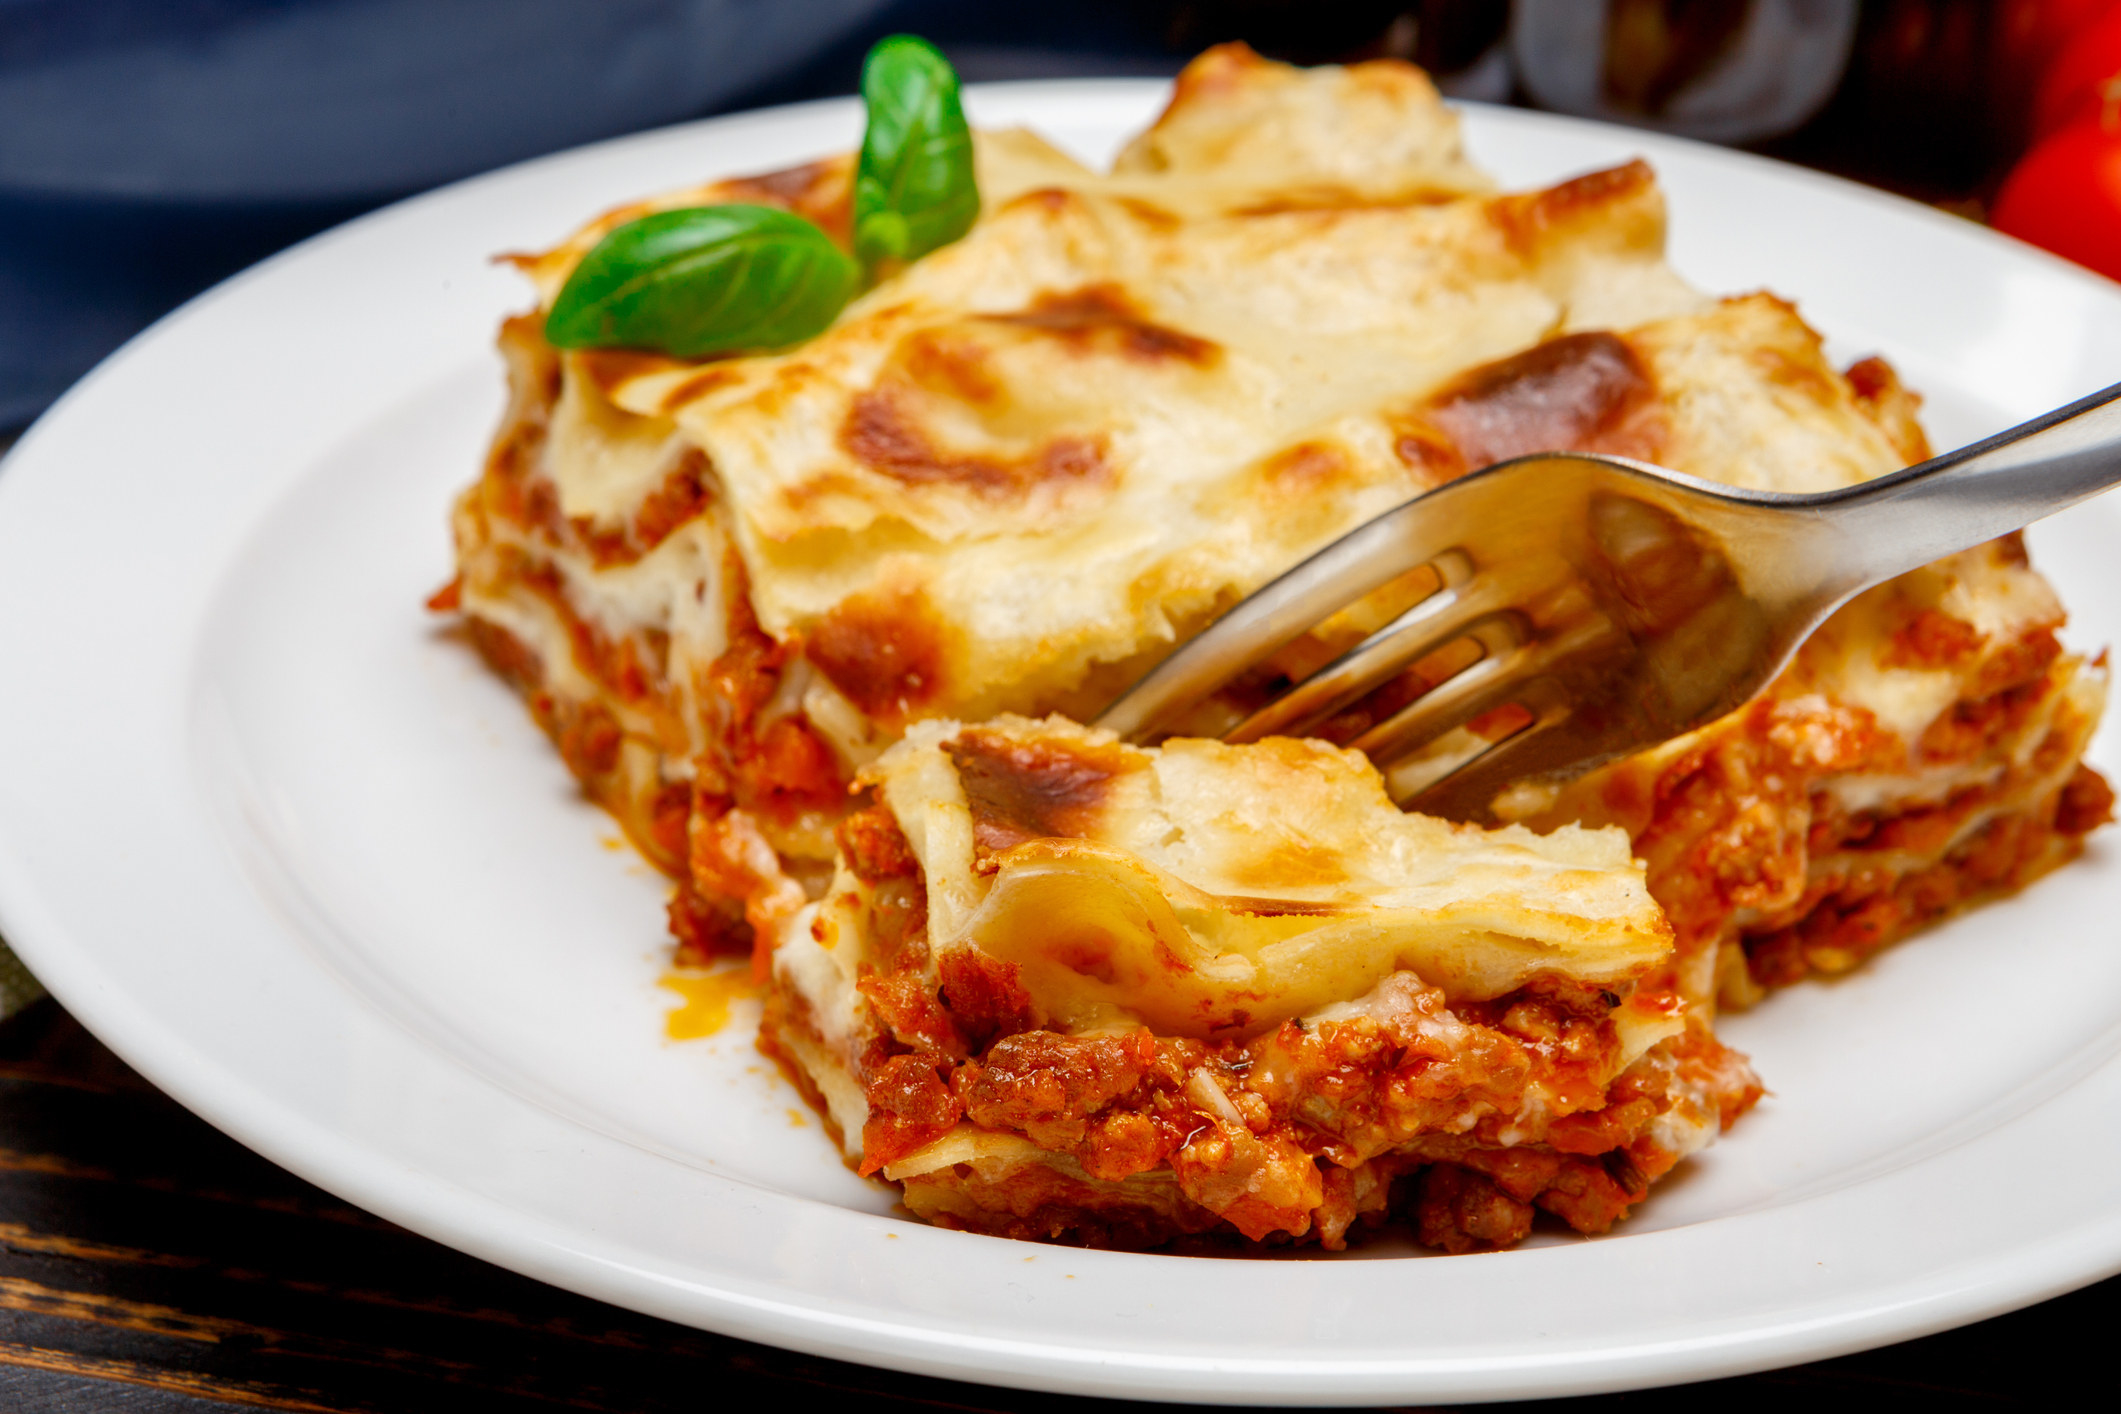 A slice of lasagna on a plate